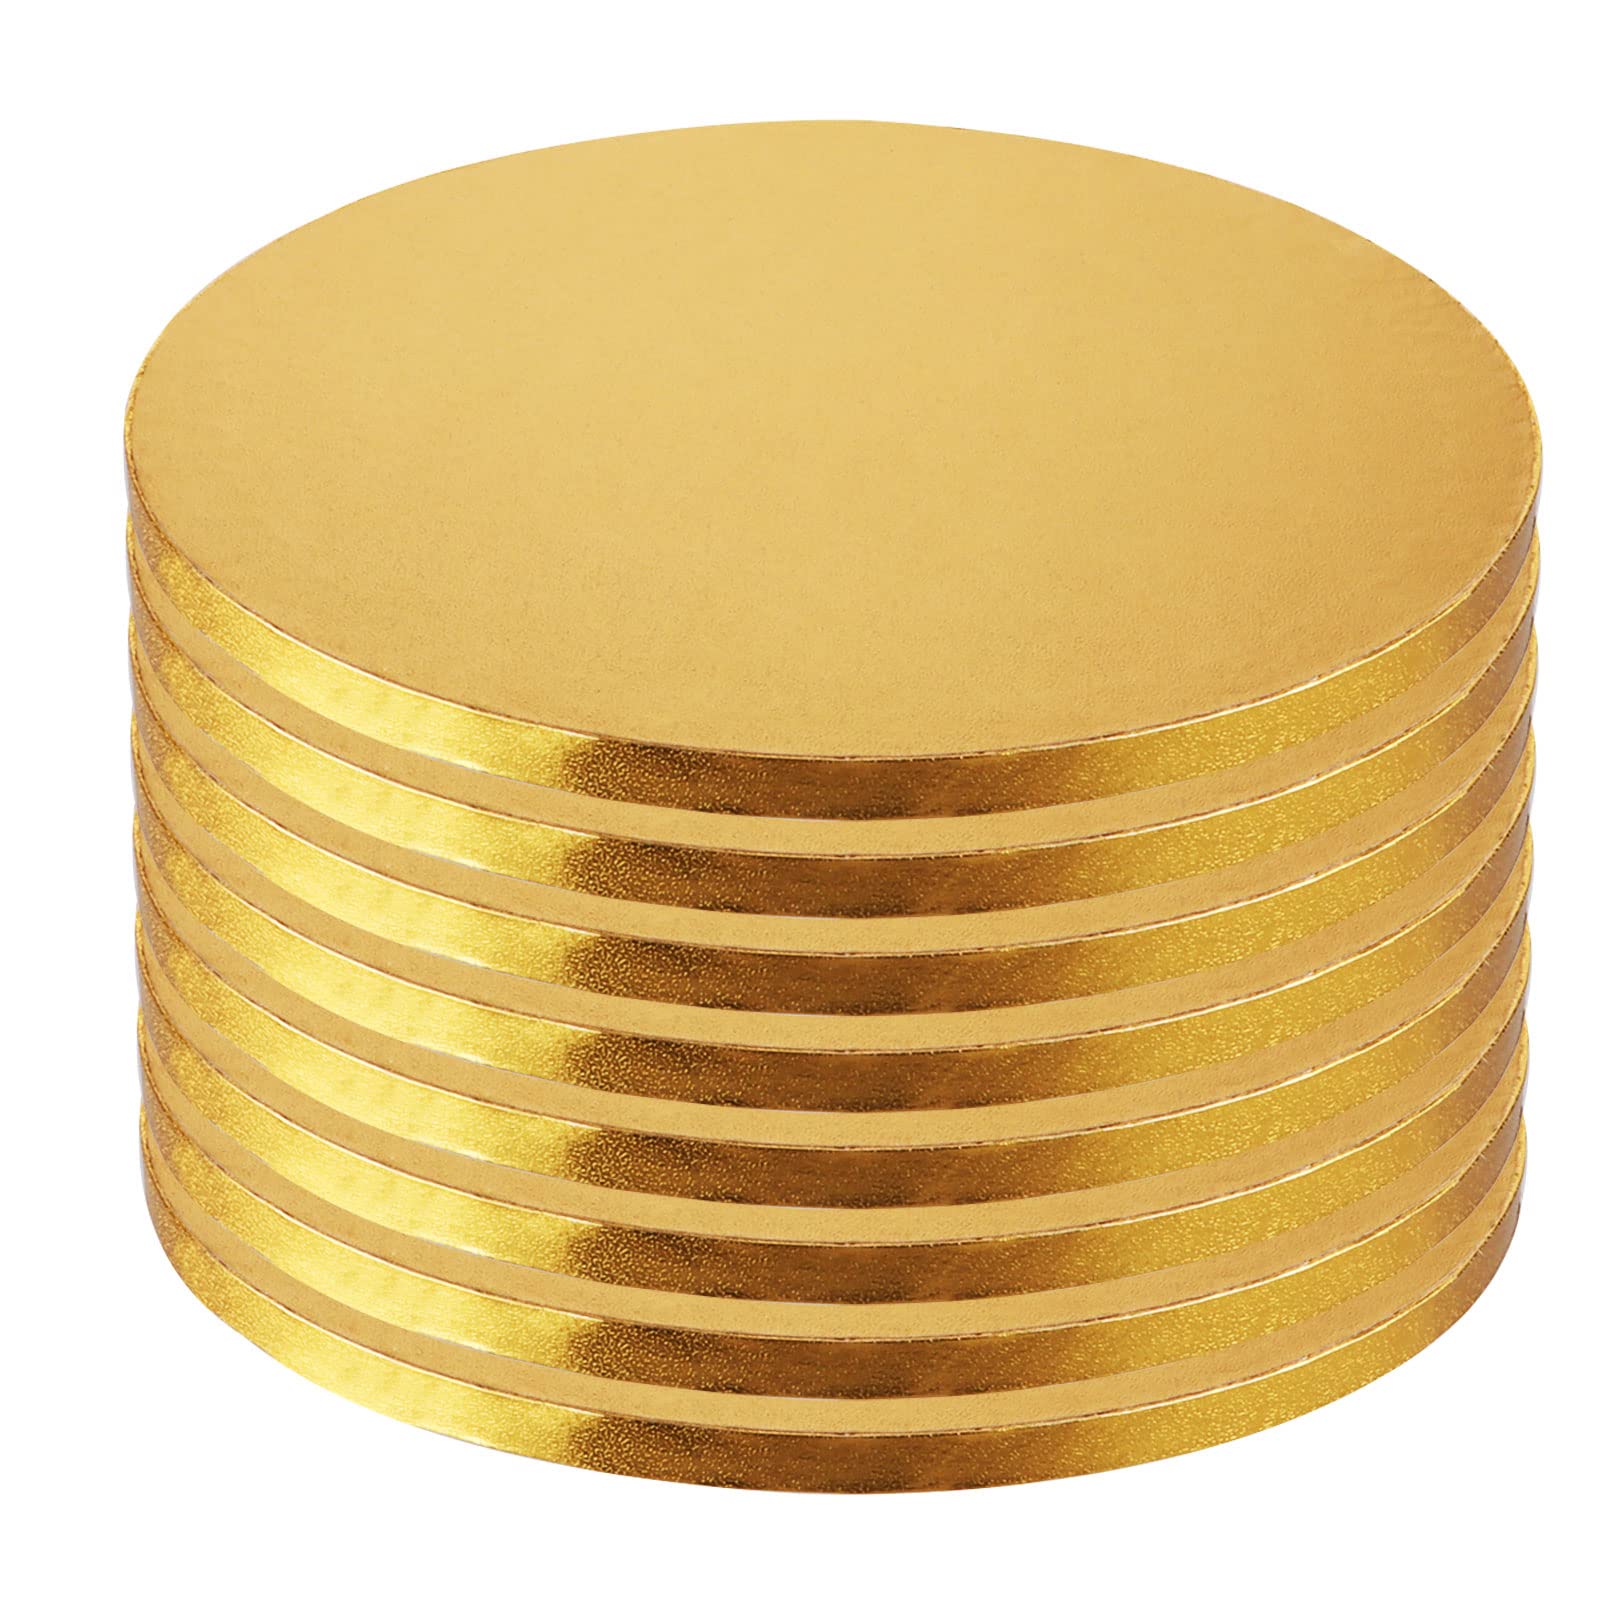 ABuff 8 Pack 12 inch Cake Drum Gold Cake Boards Round, Sturdy 1/2 Inch Thick Cake Drums Round Cake Board Greaseproof Foil Plate, Disposable Birthday Cake Drums for Heavy Or Multi-Tiered Cakes